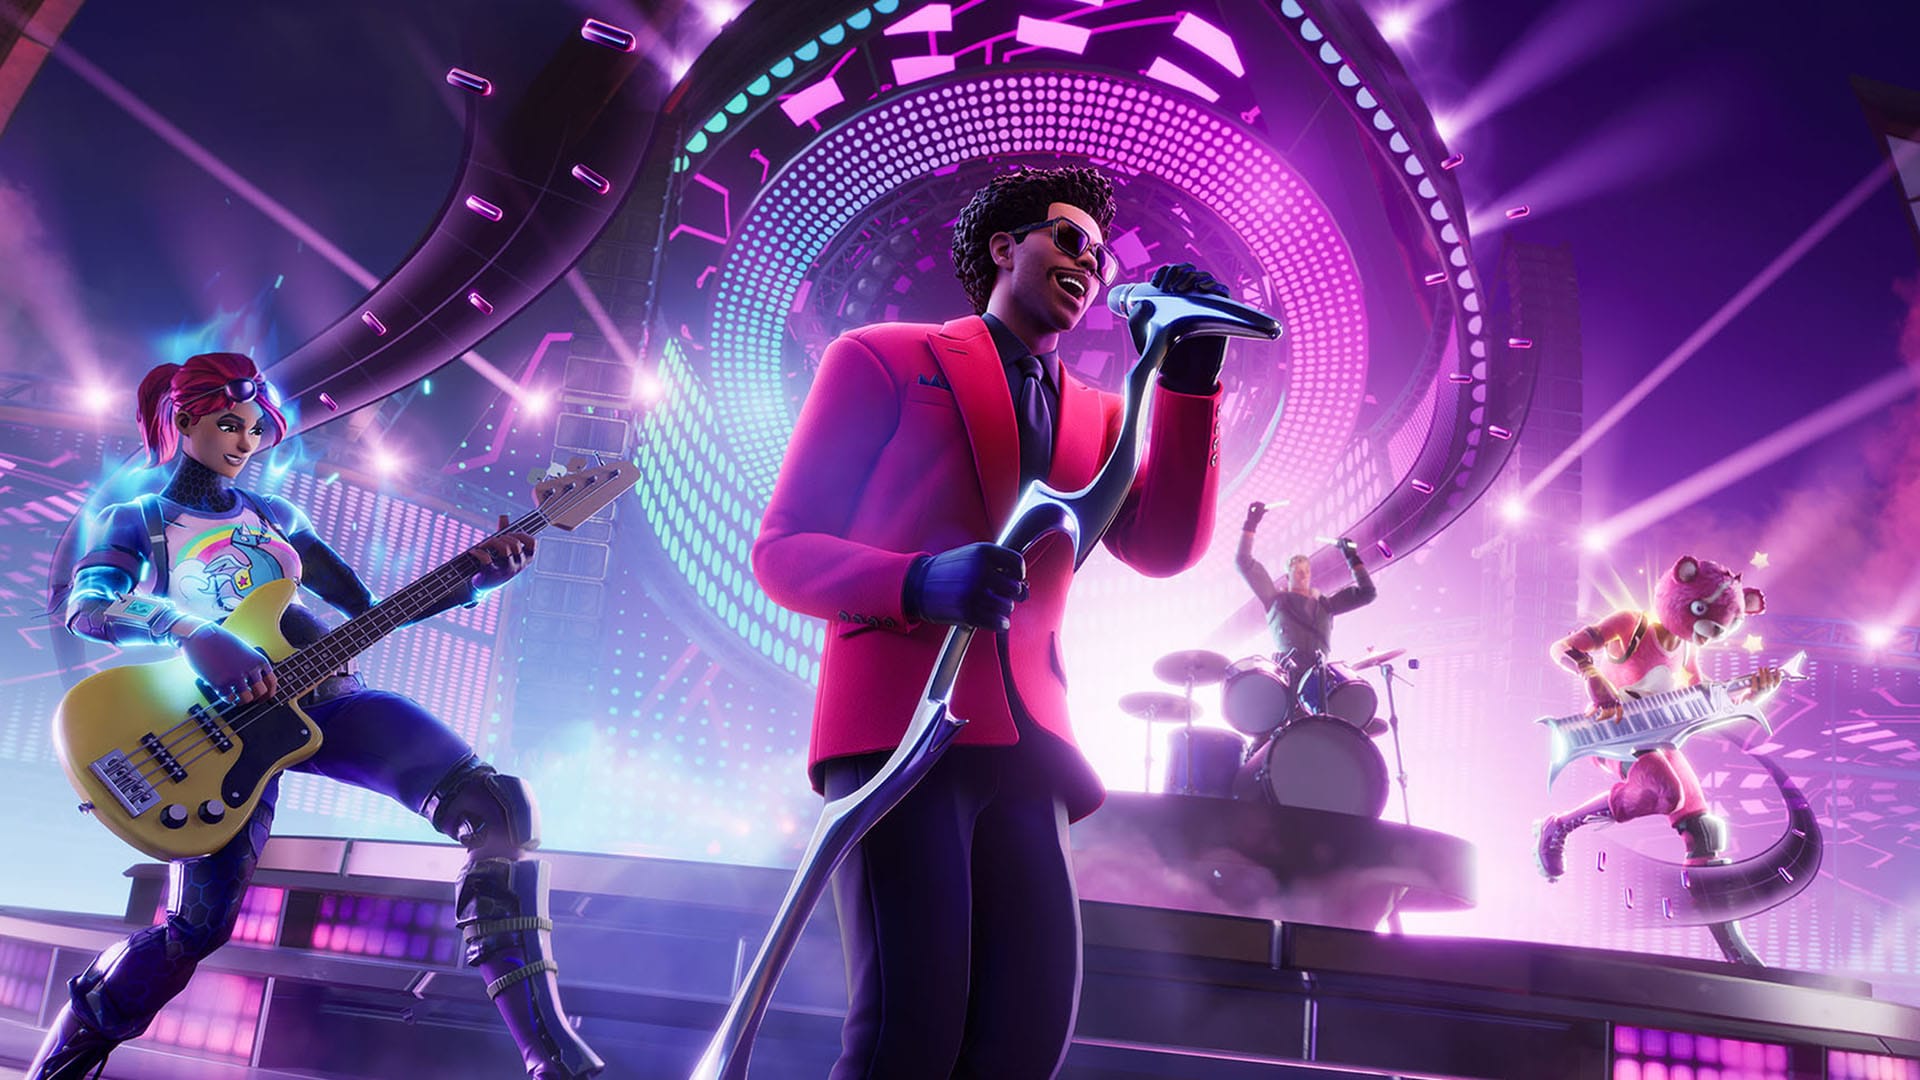 Fortnite Festival Song Setlist Revealed Including Lady Gaga, Gangnam Style, and The Cranberries